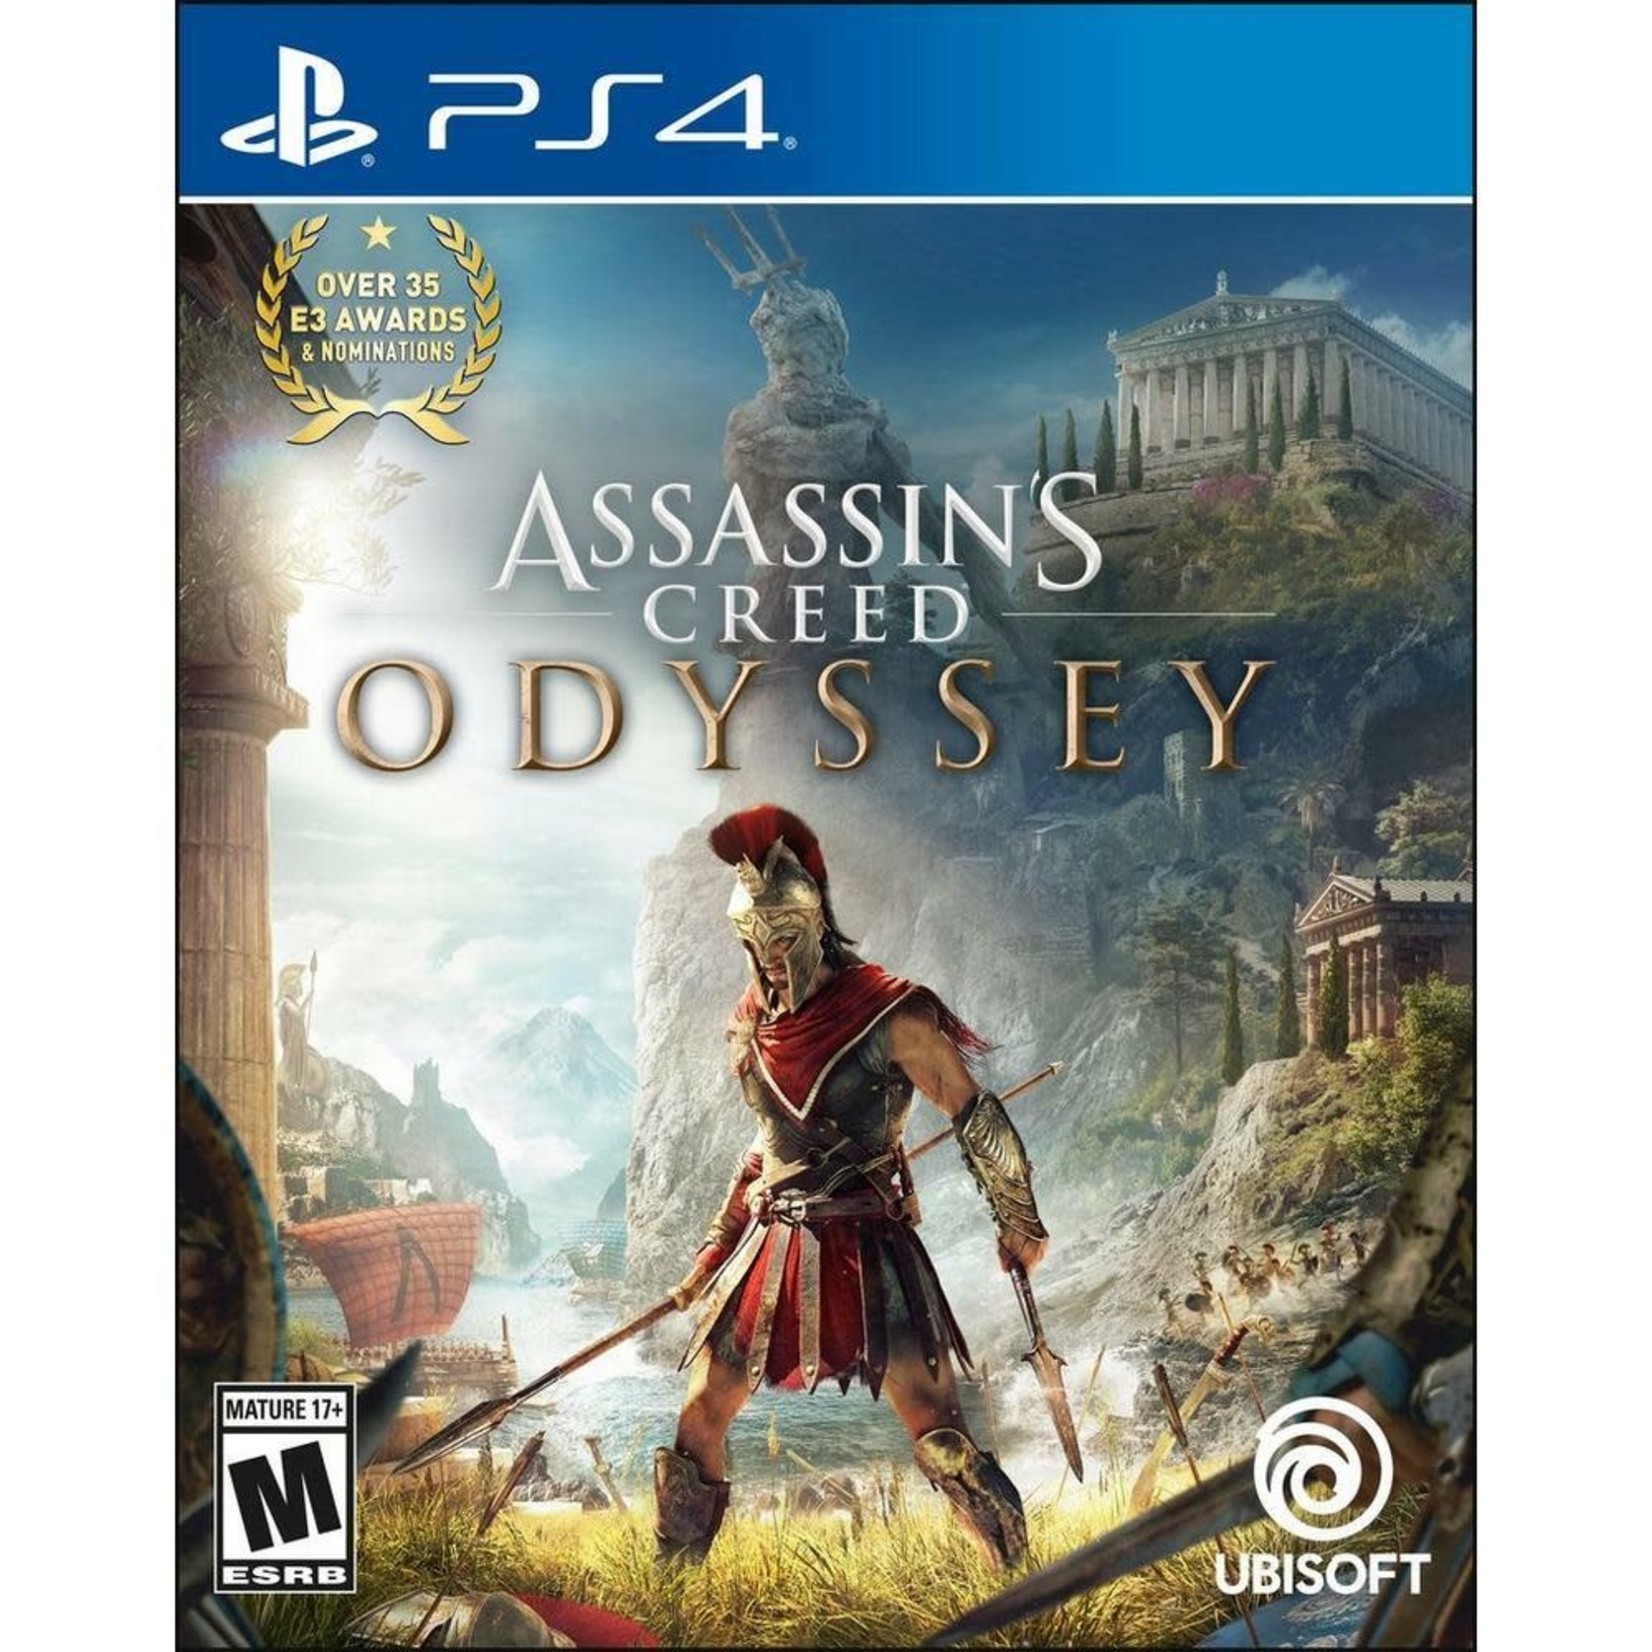 PS4U-Assassin's Creed Odyssey